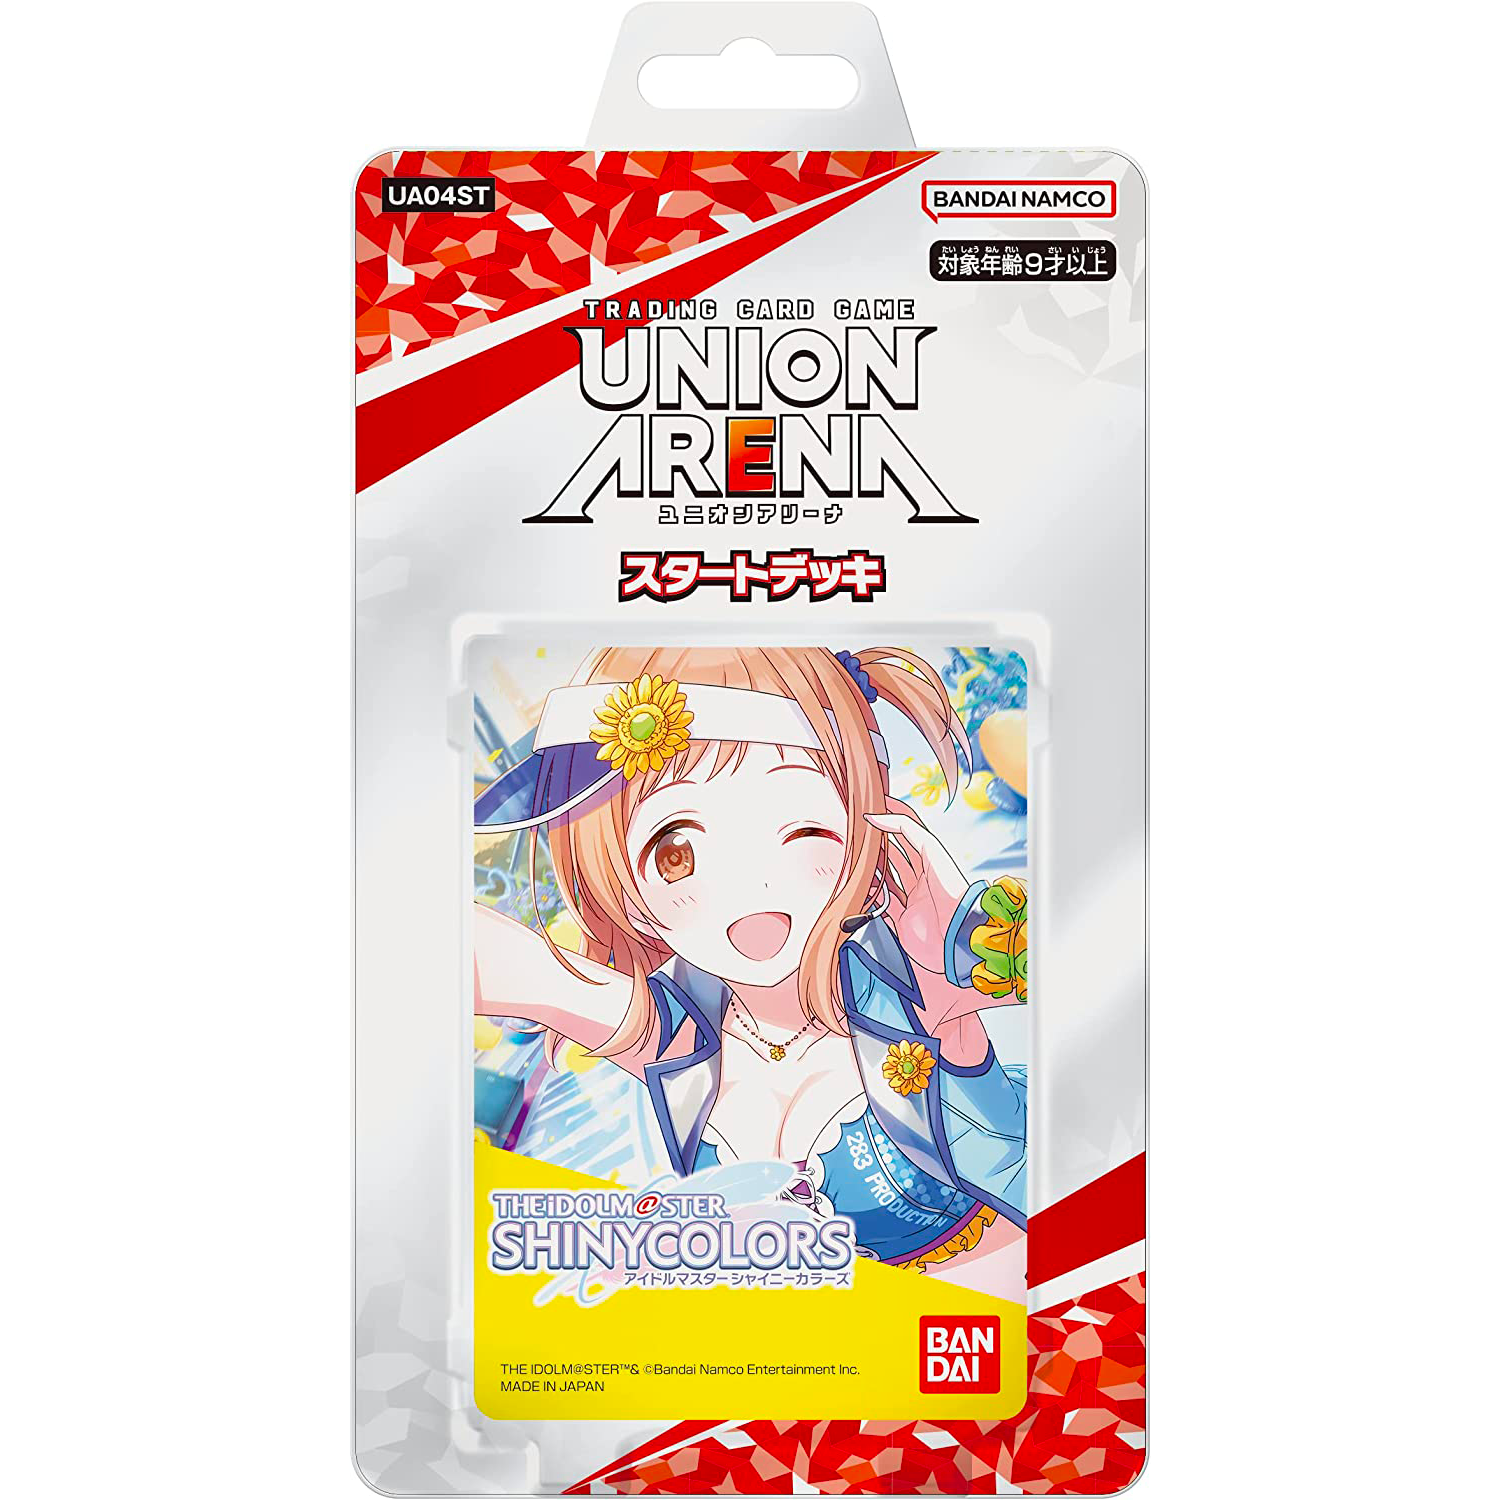 TRADING CARD GAME UNION ARENA STARTER DECK [UA04ST] THE IDOLM@STER SHINYCOLORS